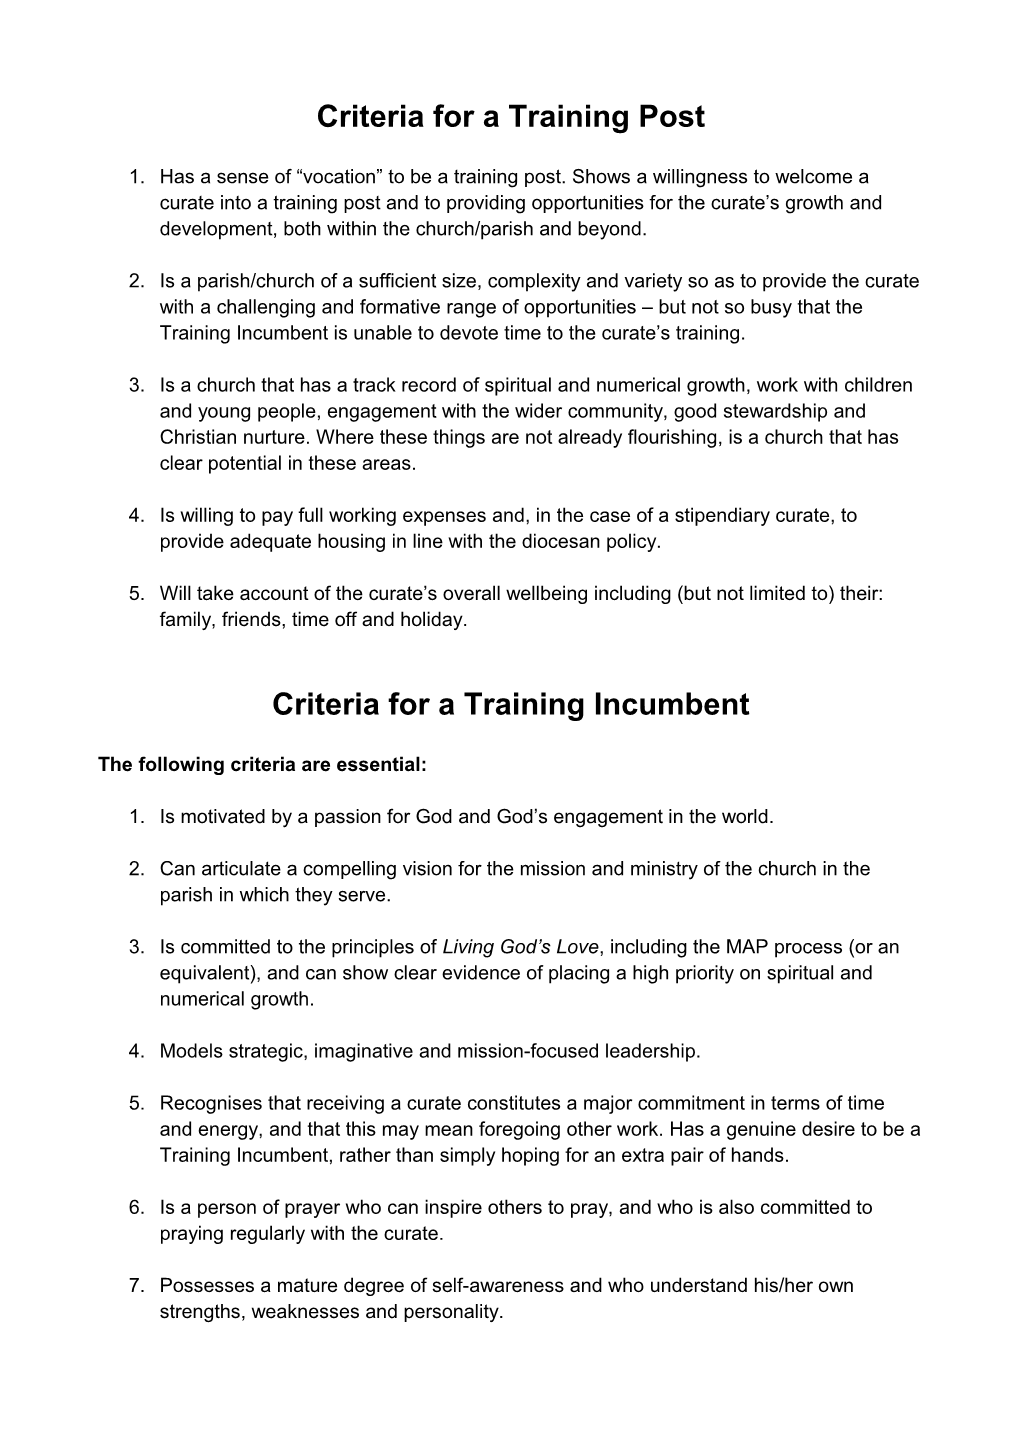 Criteria for a Training Post